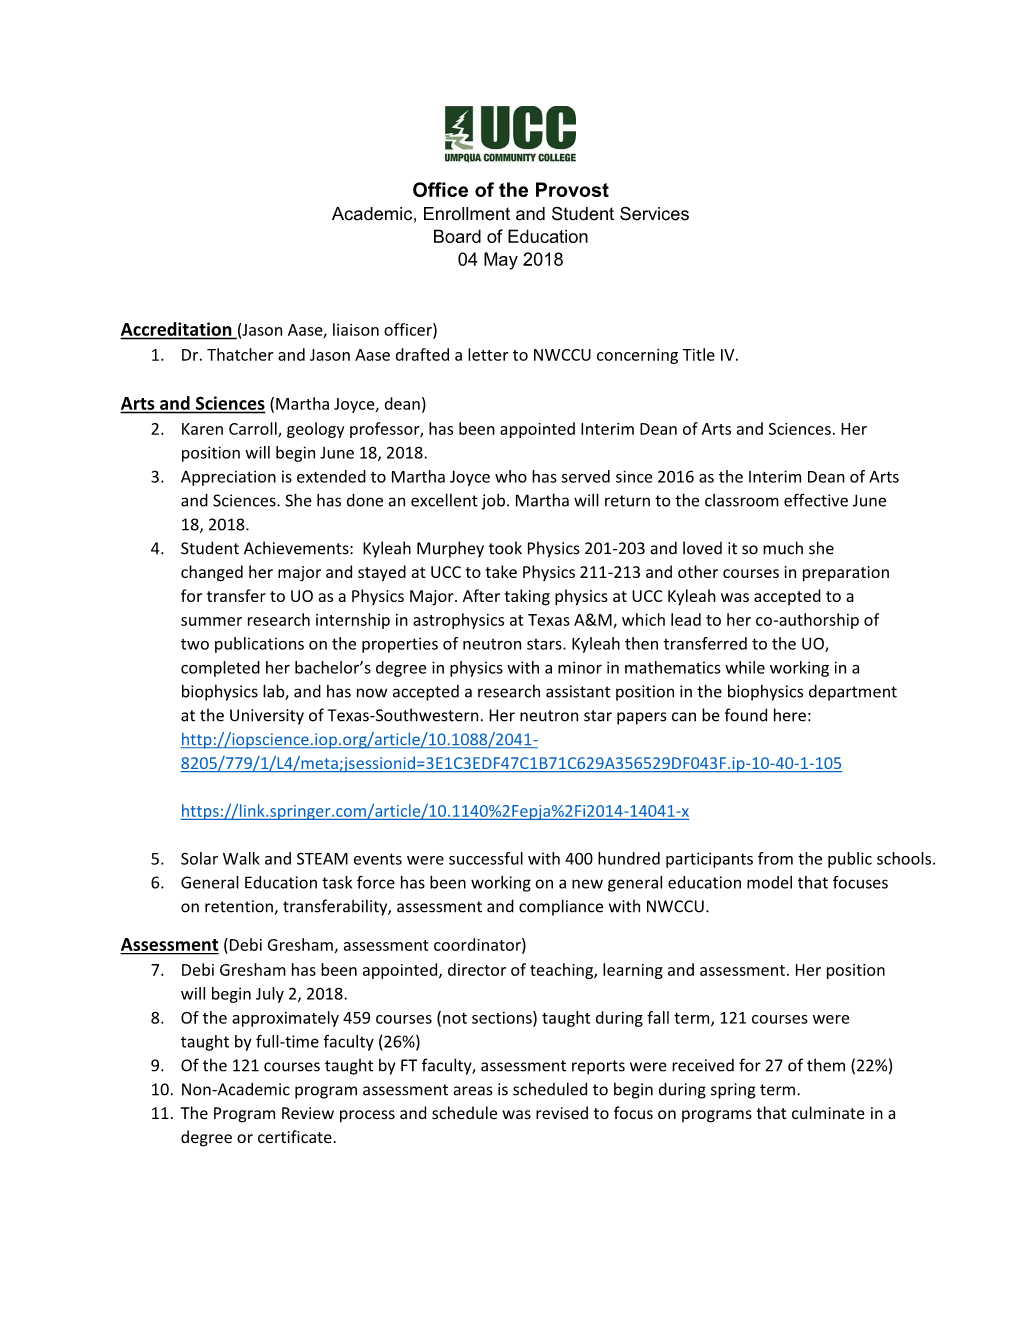 Office of the Provost Academic, Enrollment and Student Services Board of Education 04 May 2018